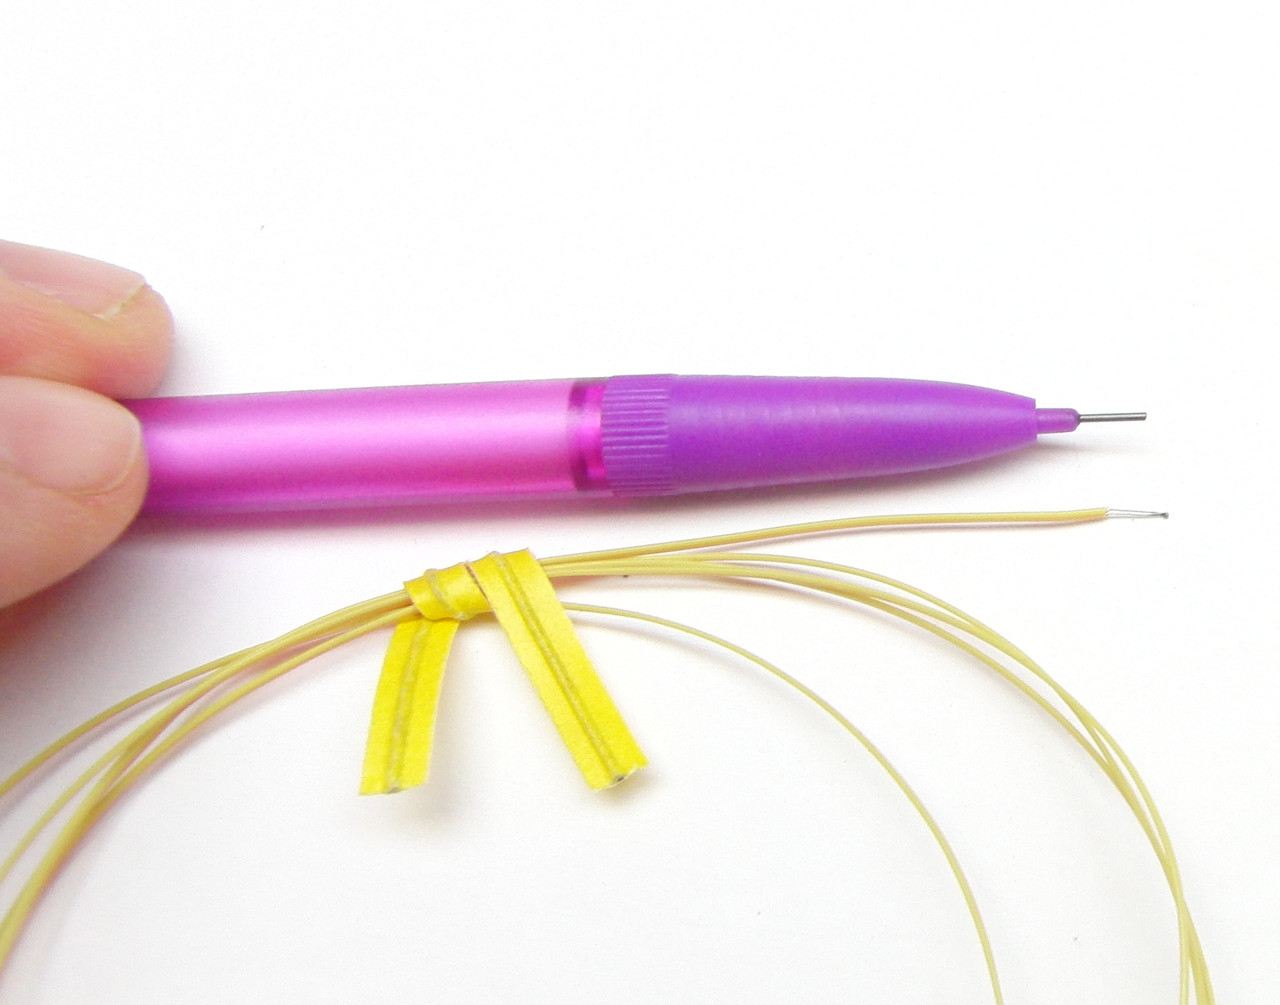 Super Thin Wire -- .5mm, 36AWG, 10m Roll, Purple